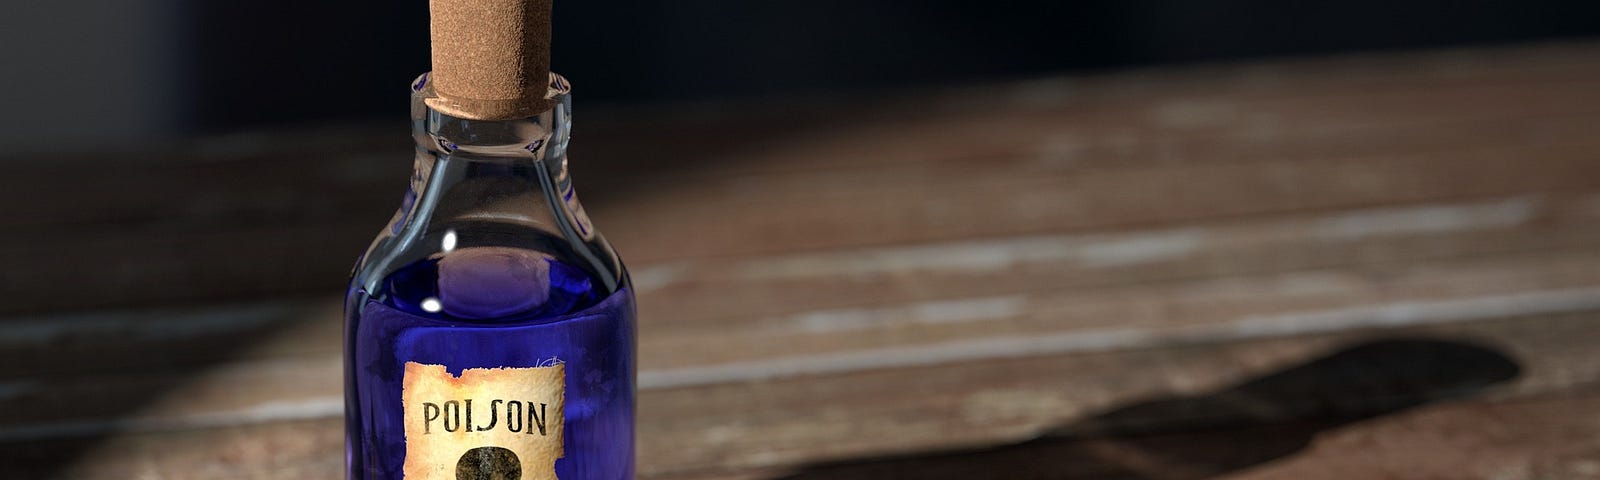 A glass bottle of purple liquid with a label reading “POISON” with a picture of a skull & crossbones.